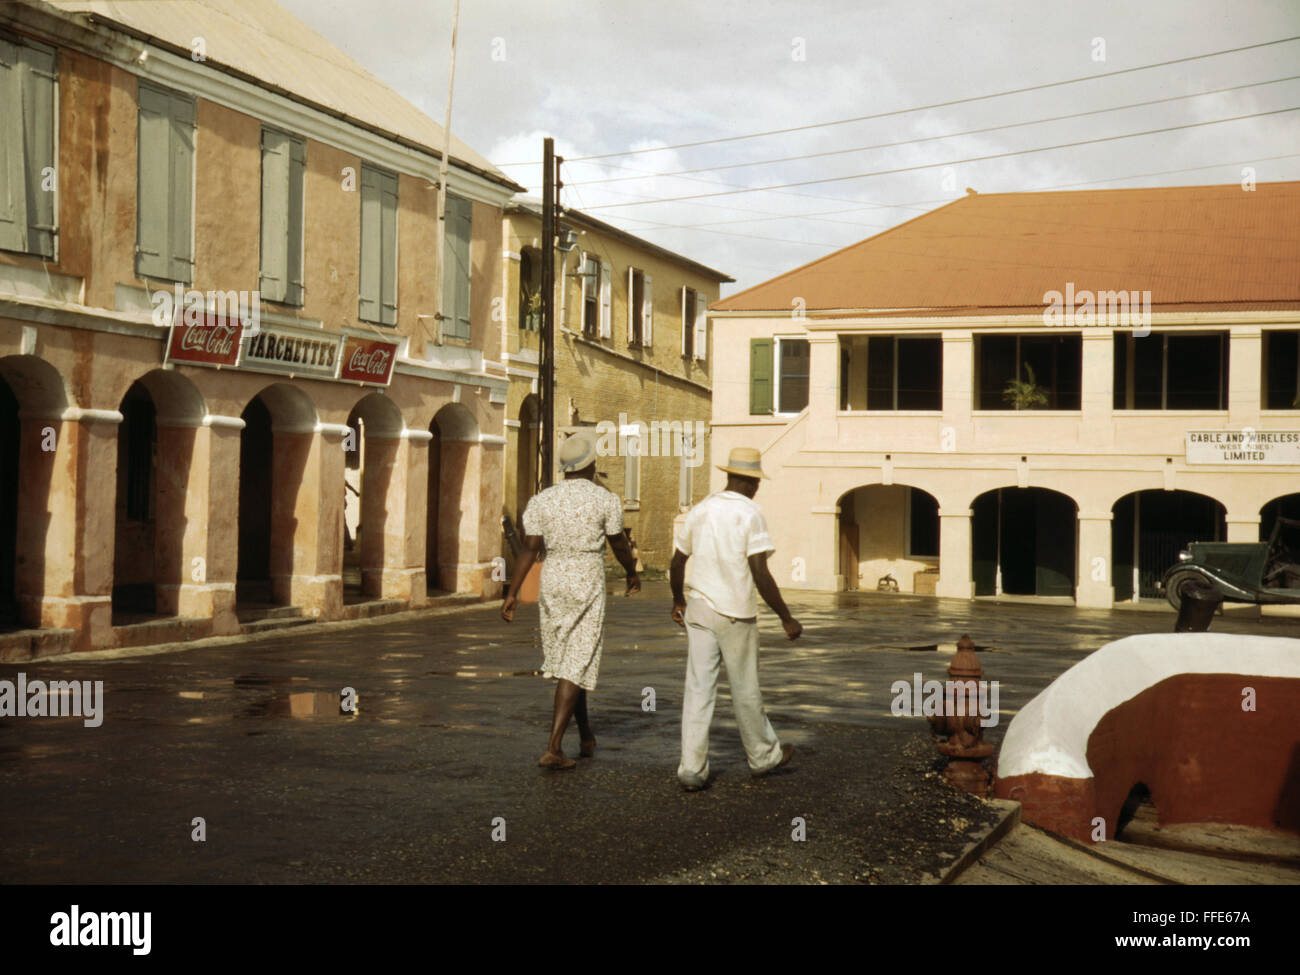 ST. CROIX, 1941. /nStreet in a town in Christiansted, St. Croix, Virgin Islands. Photograph by Jack Delano, 1941. Stock Photo